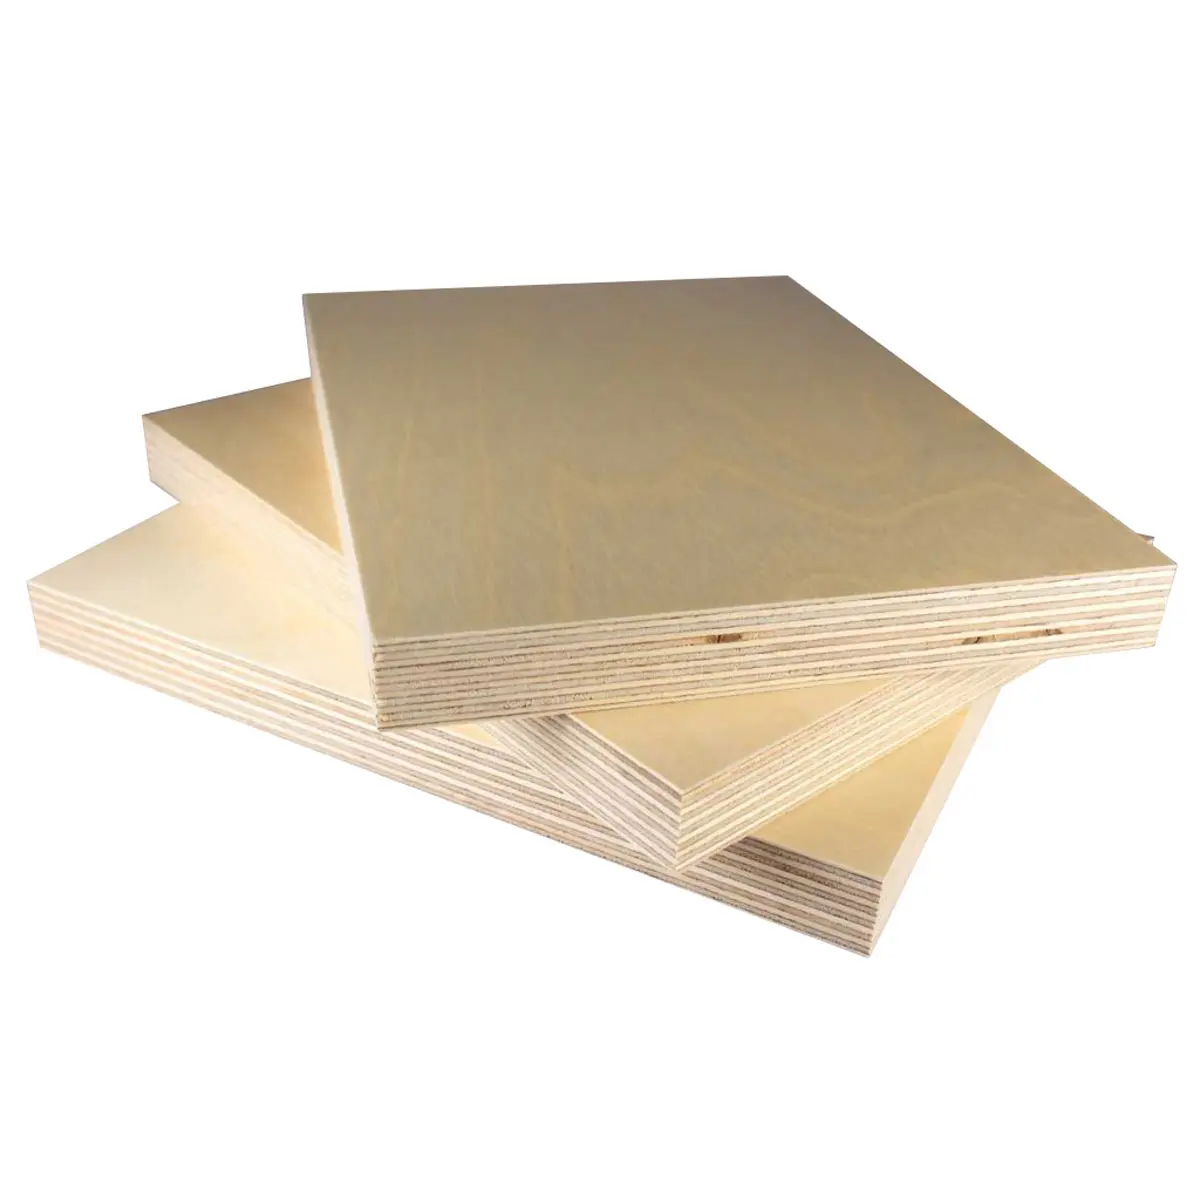 Plywood for flooring